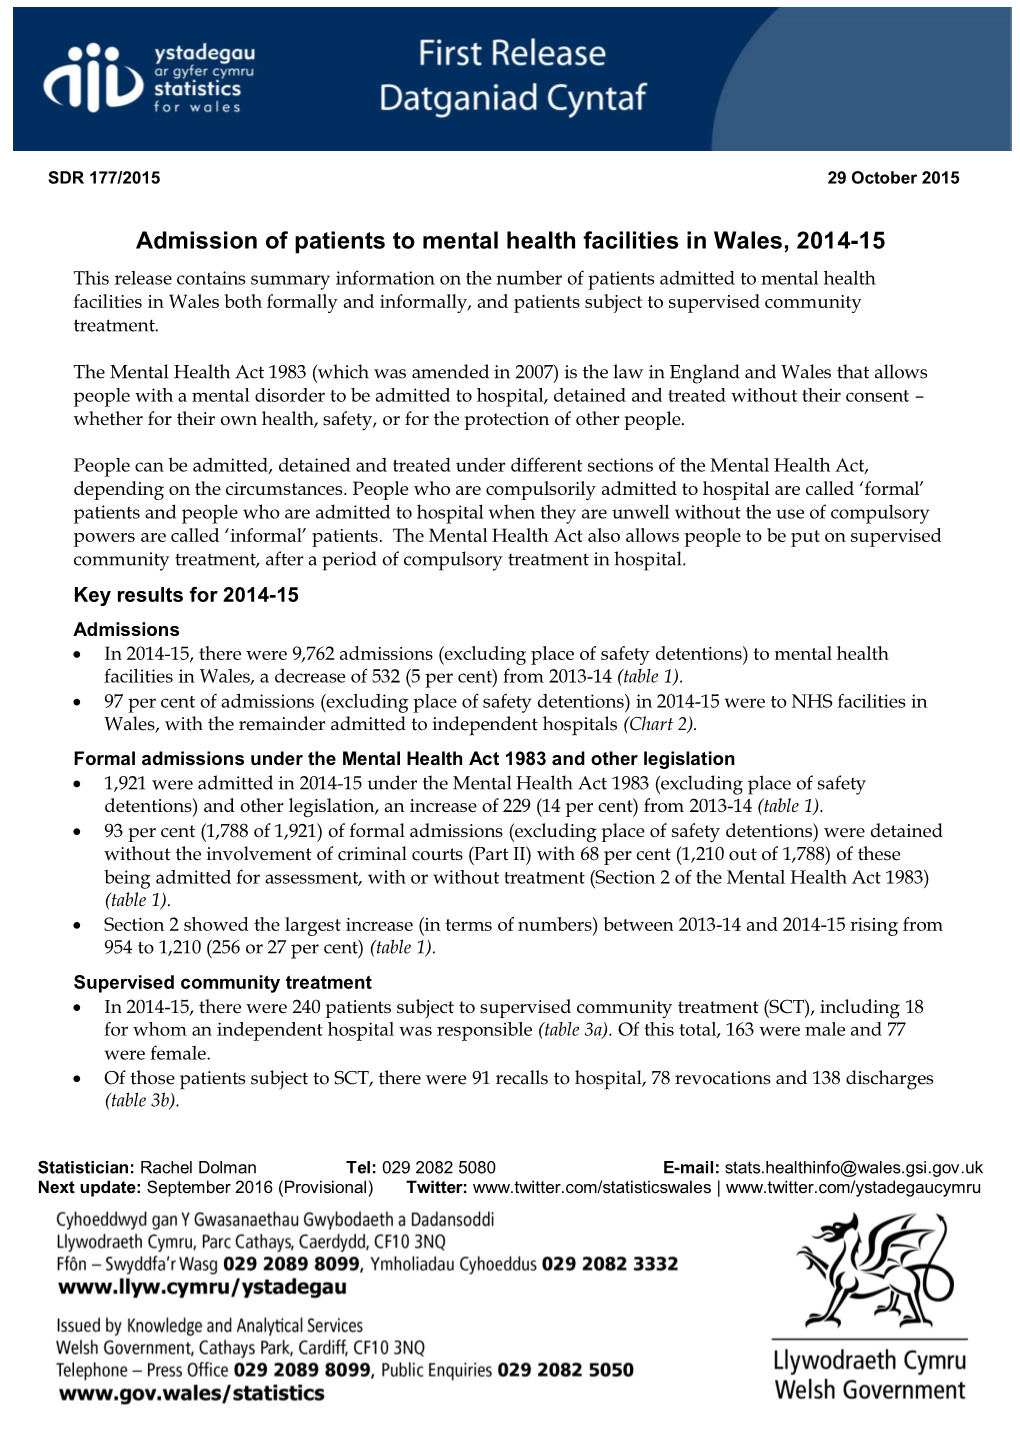 Admission of Patients to Mental Health Facilities in Wales, 2014-15